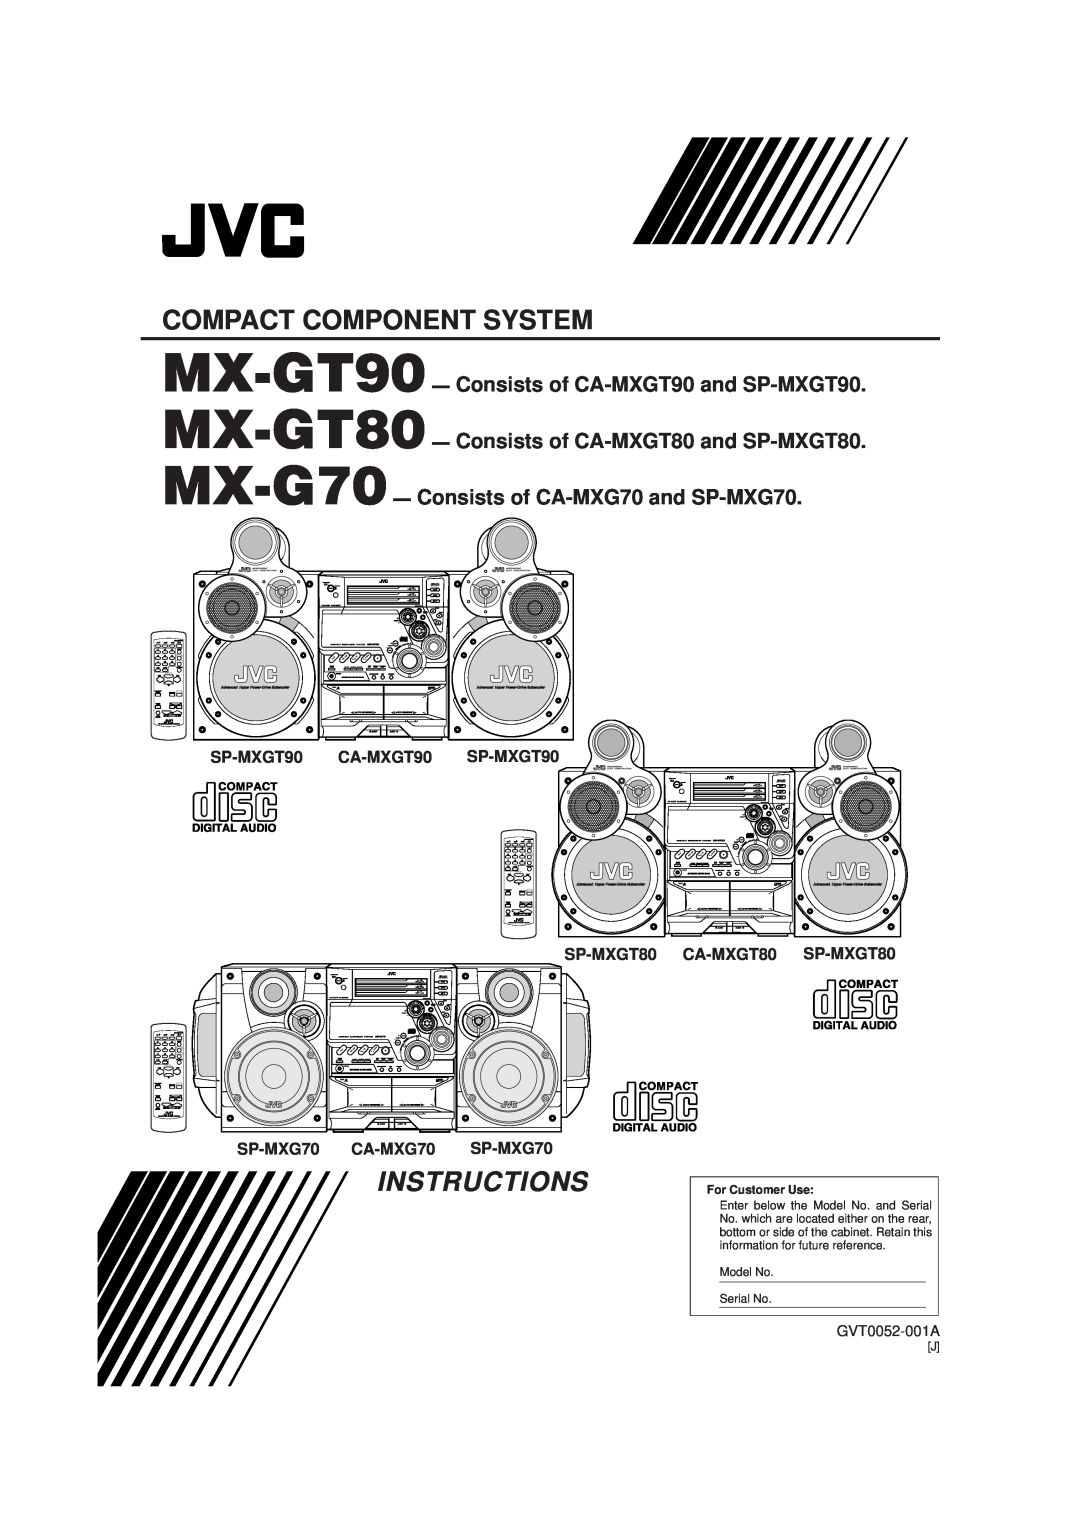 JVC MX-GT70 manual Compact Component System, SP-MXGT90 CA-MXGT90, SP-MXG70, CA-MXG70, SP-MXGT80, CA-MXGT80, GVT0052-001A 